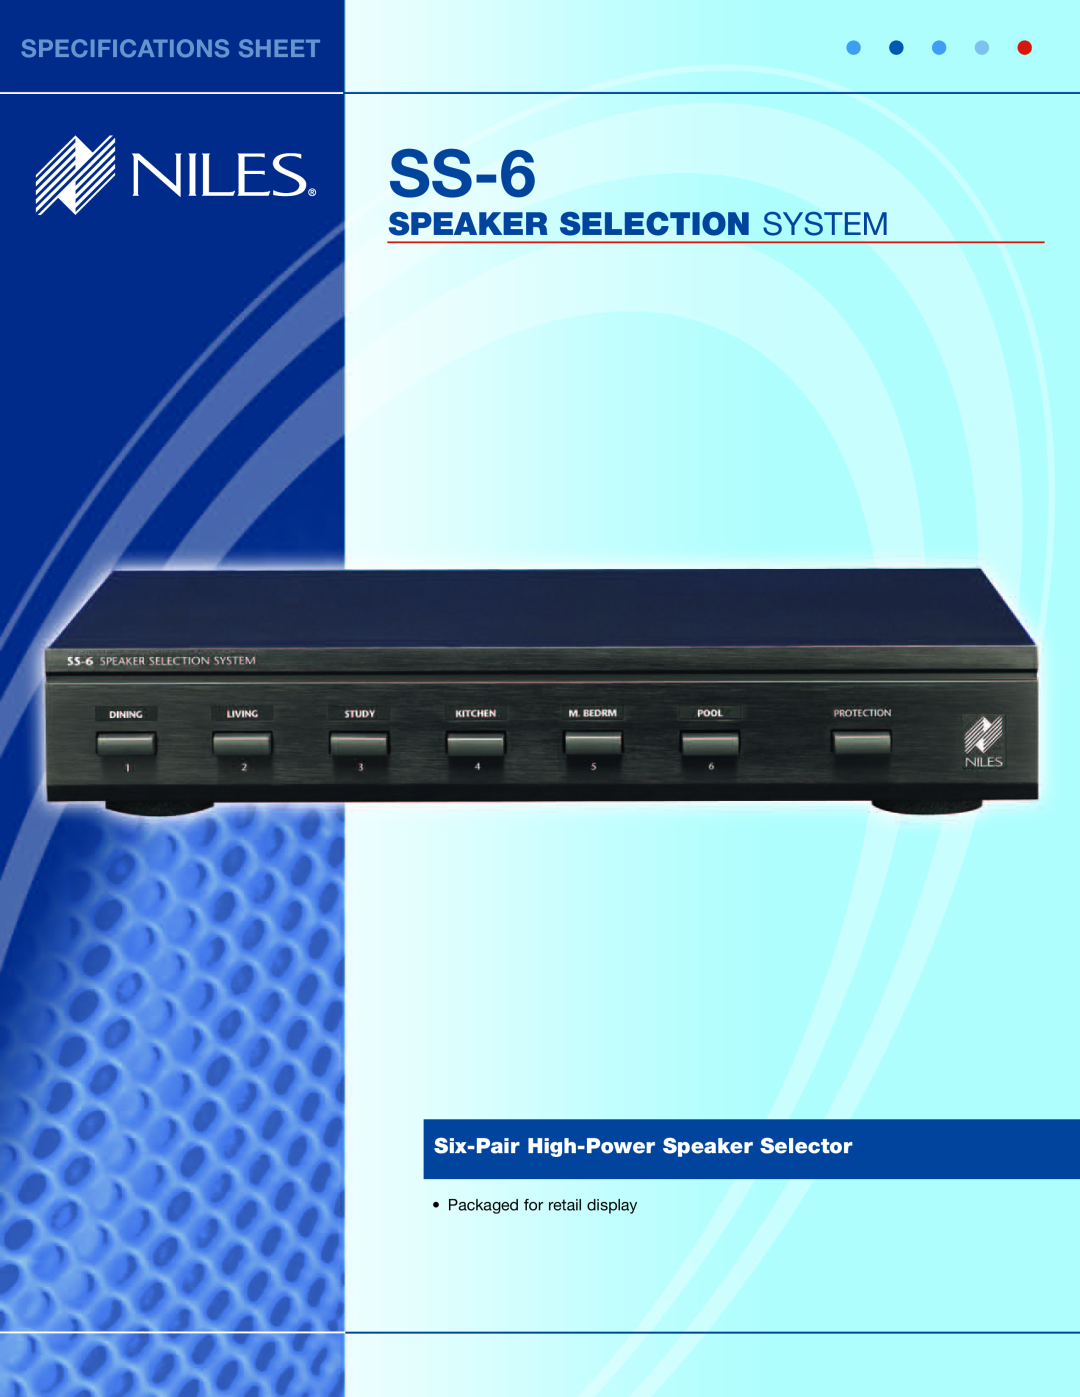 Niles Audio 643-043 specifications Packaged for retail display, SS-6, Speaker Selection System, Specifications Sheet 